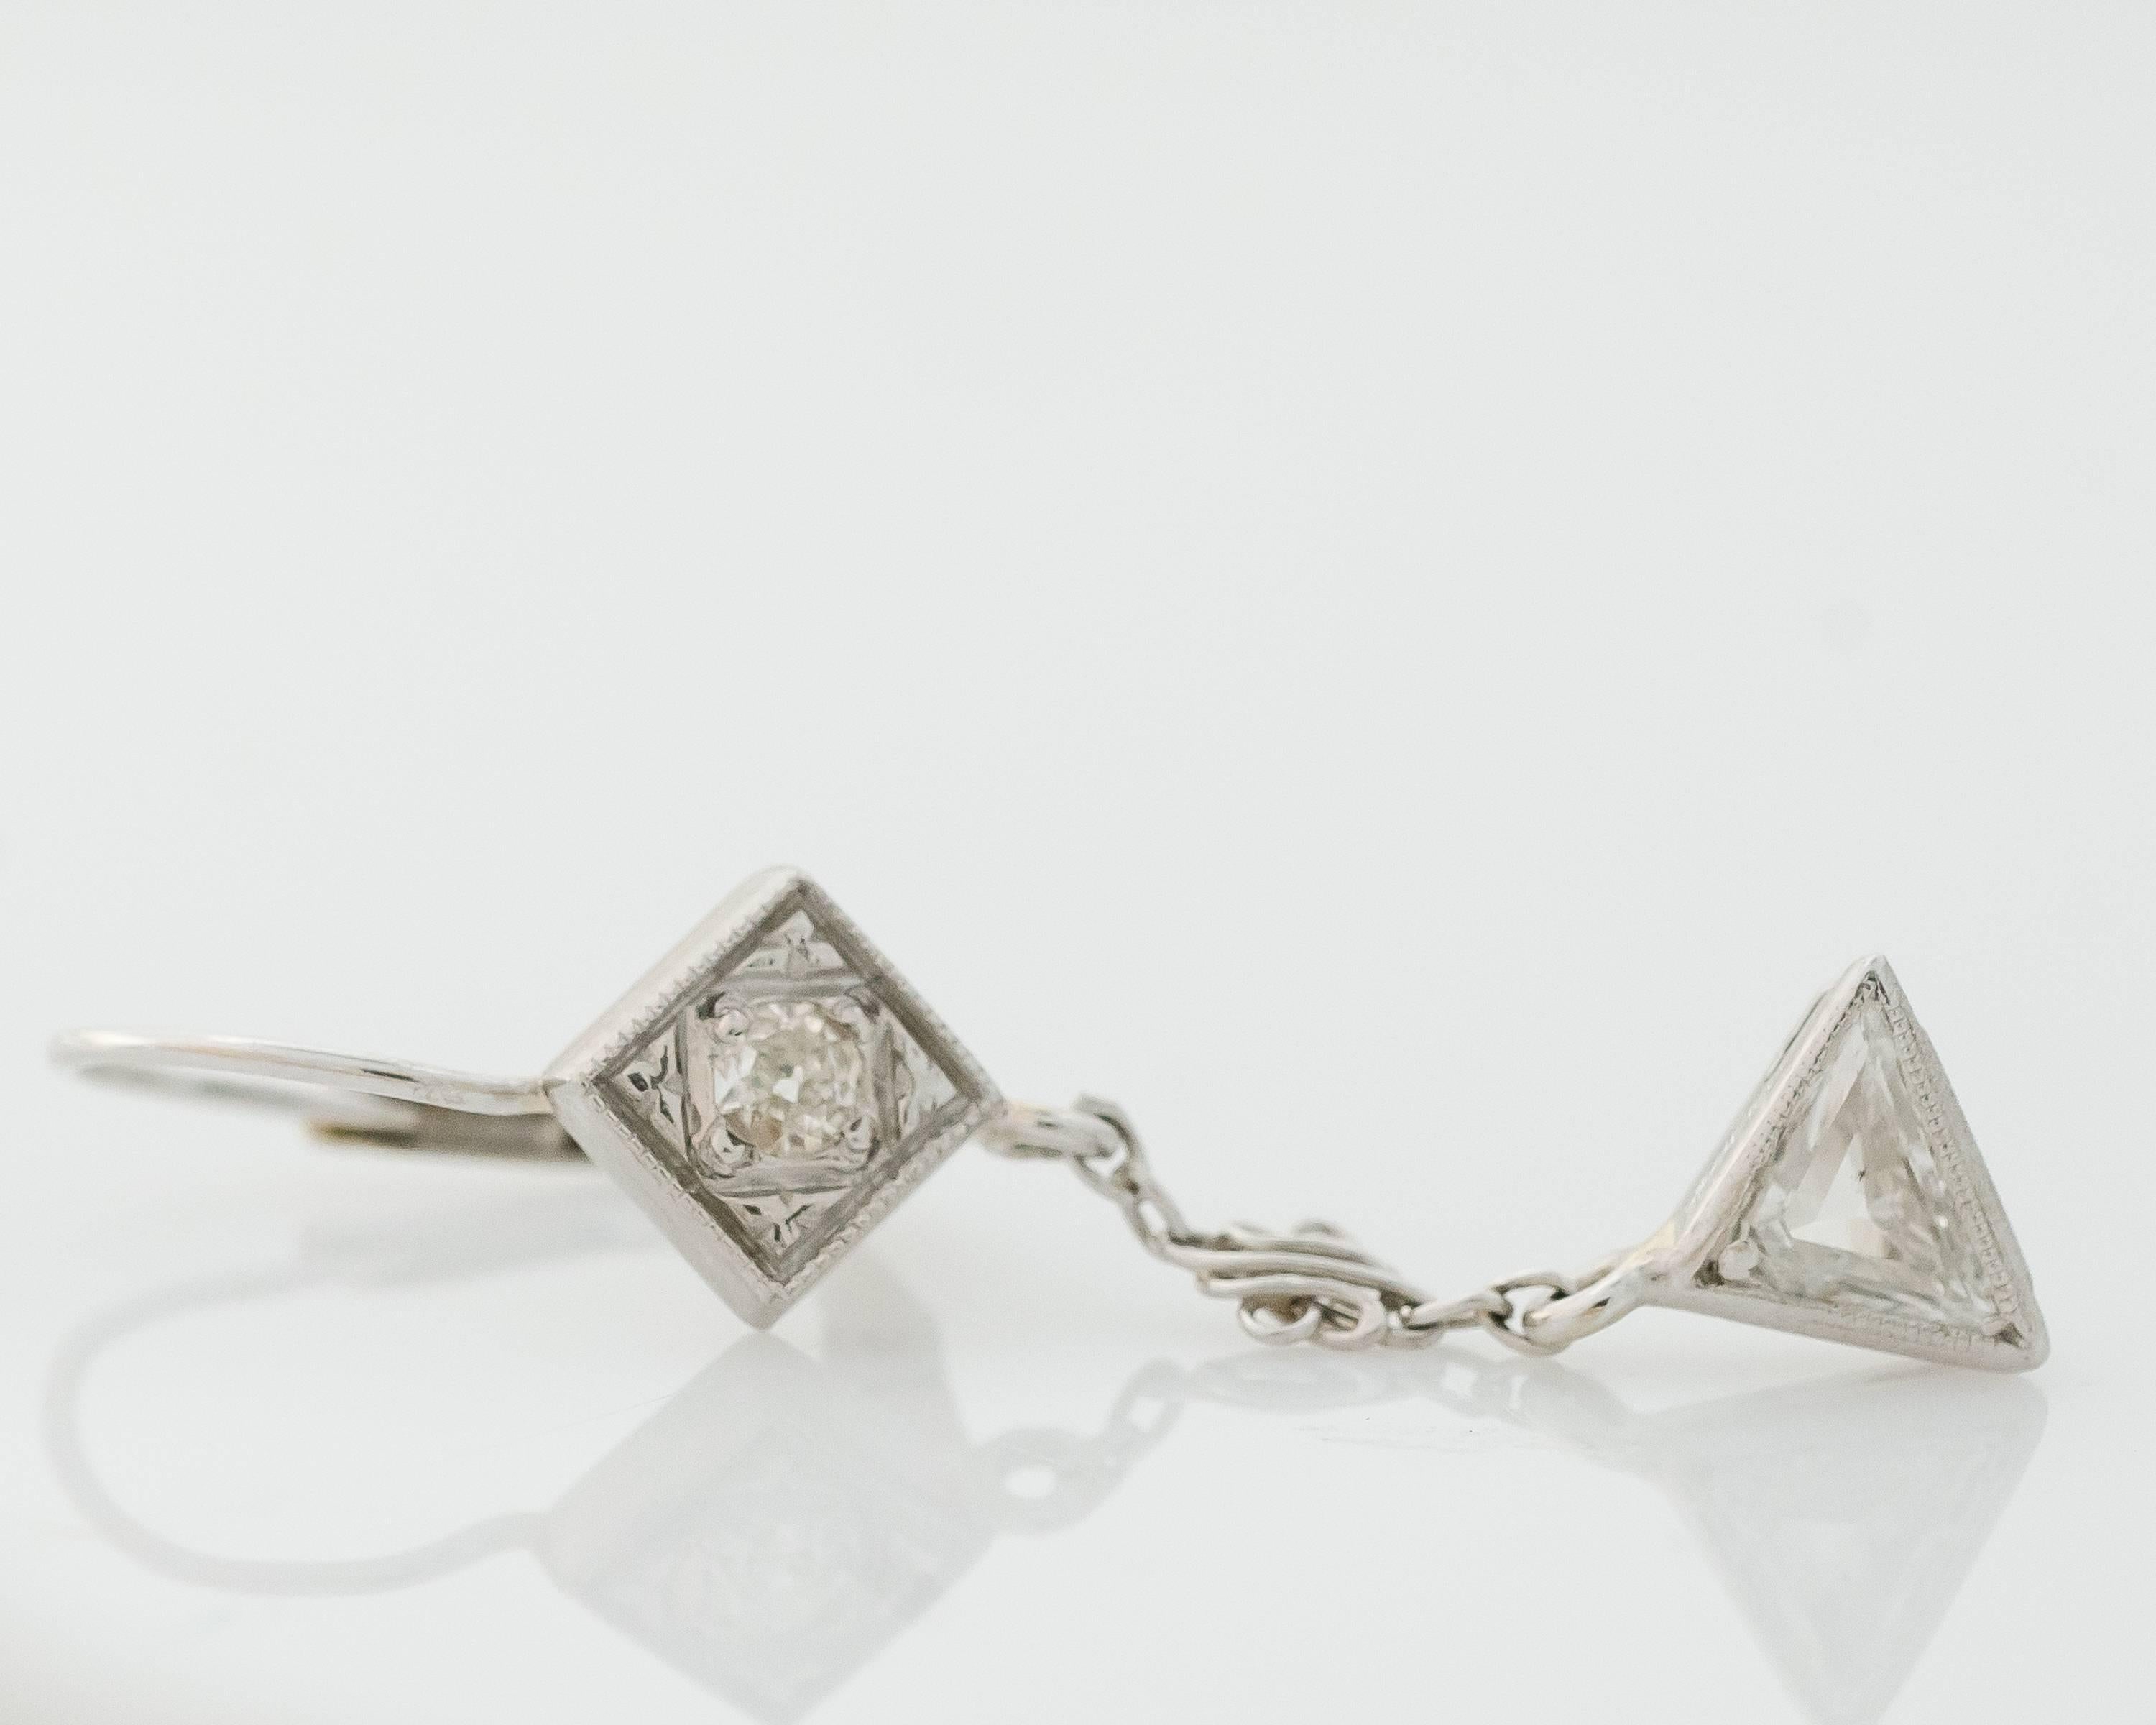 This pair of 1920s Art Deco Old Mine Diamond and 14 karat white Gold Earrings exemplifies excellence and attention to detail. Each earring features an Old Mine Brilliant Diamond in a diamond shaped setting at the top. 

Attached to this is a link of